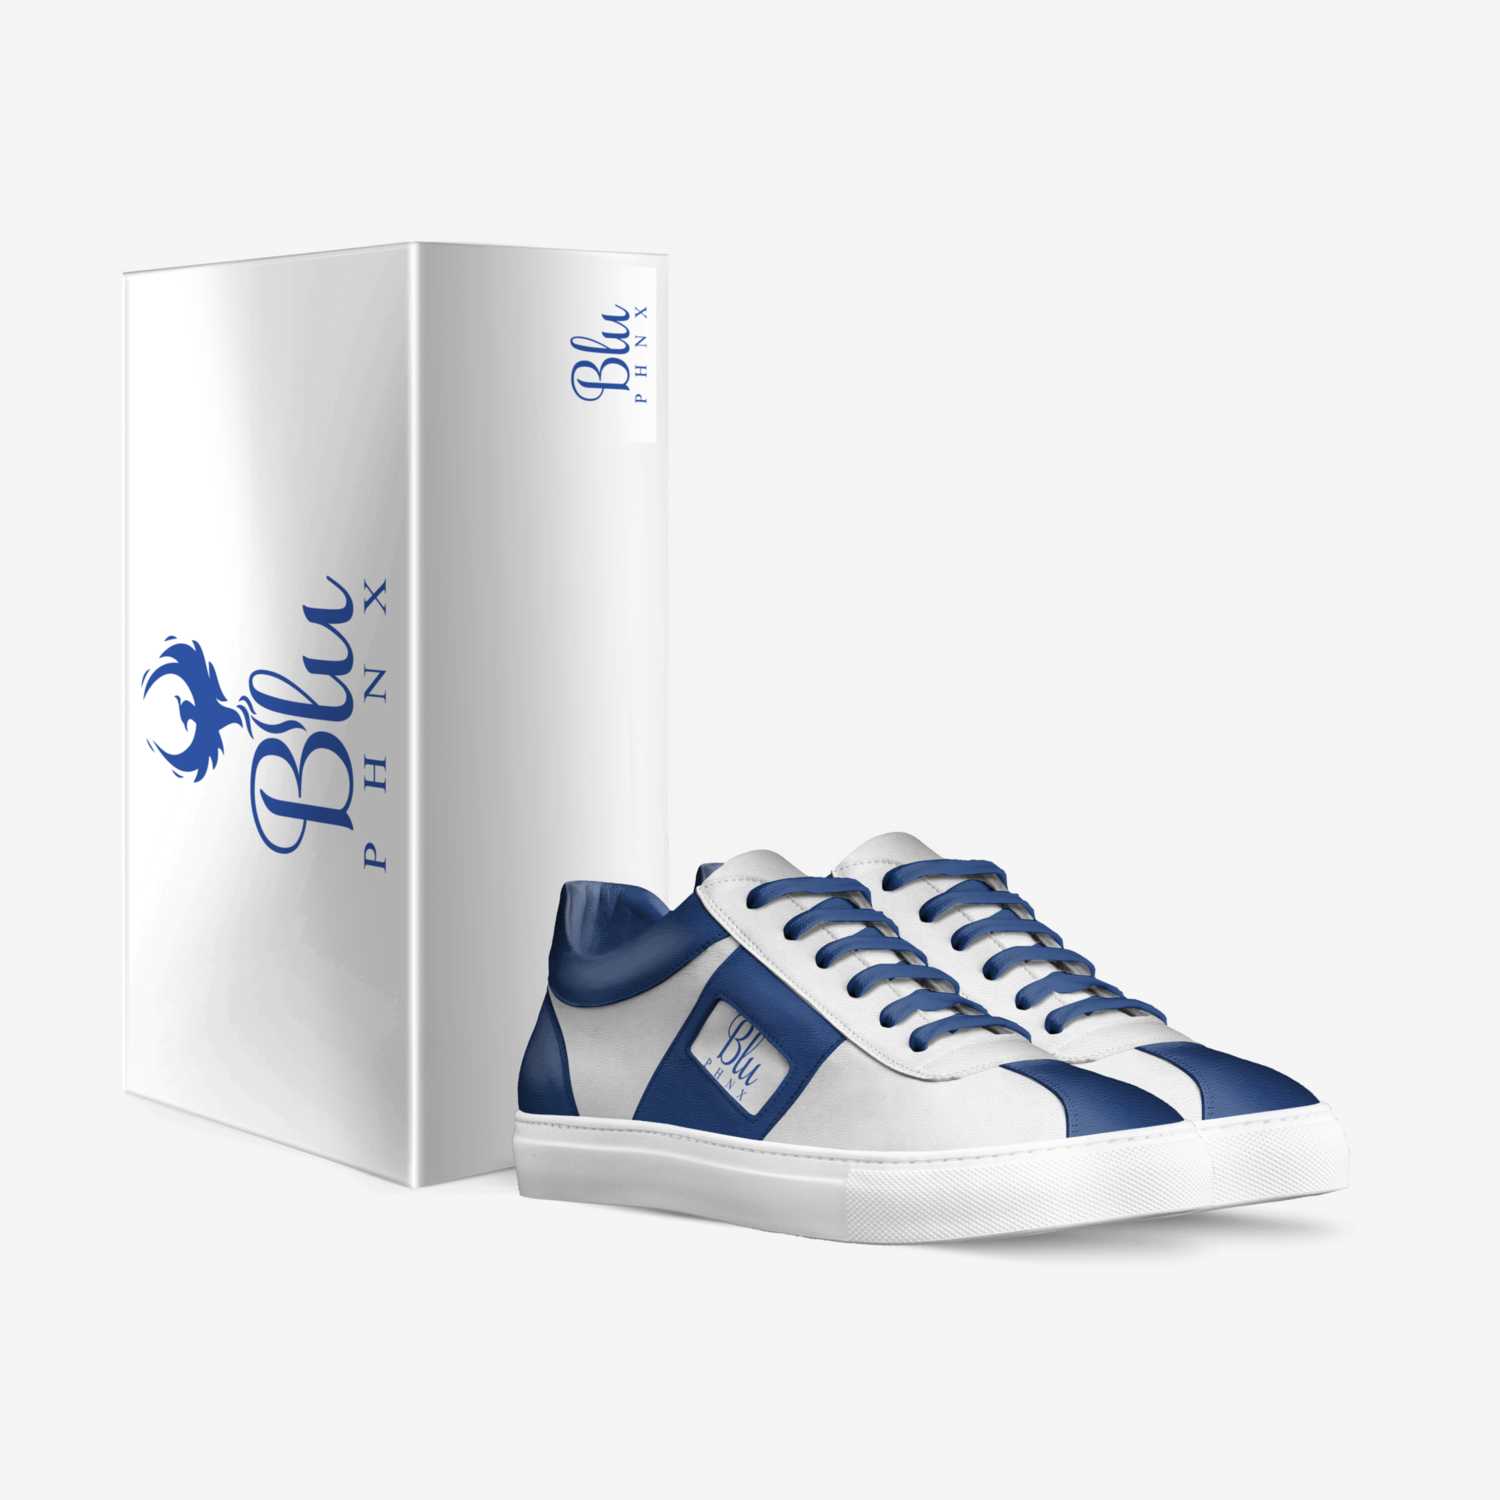 BLU PHNX custom made in Italy shoes by Lt Williams | Box view